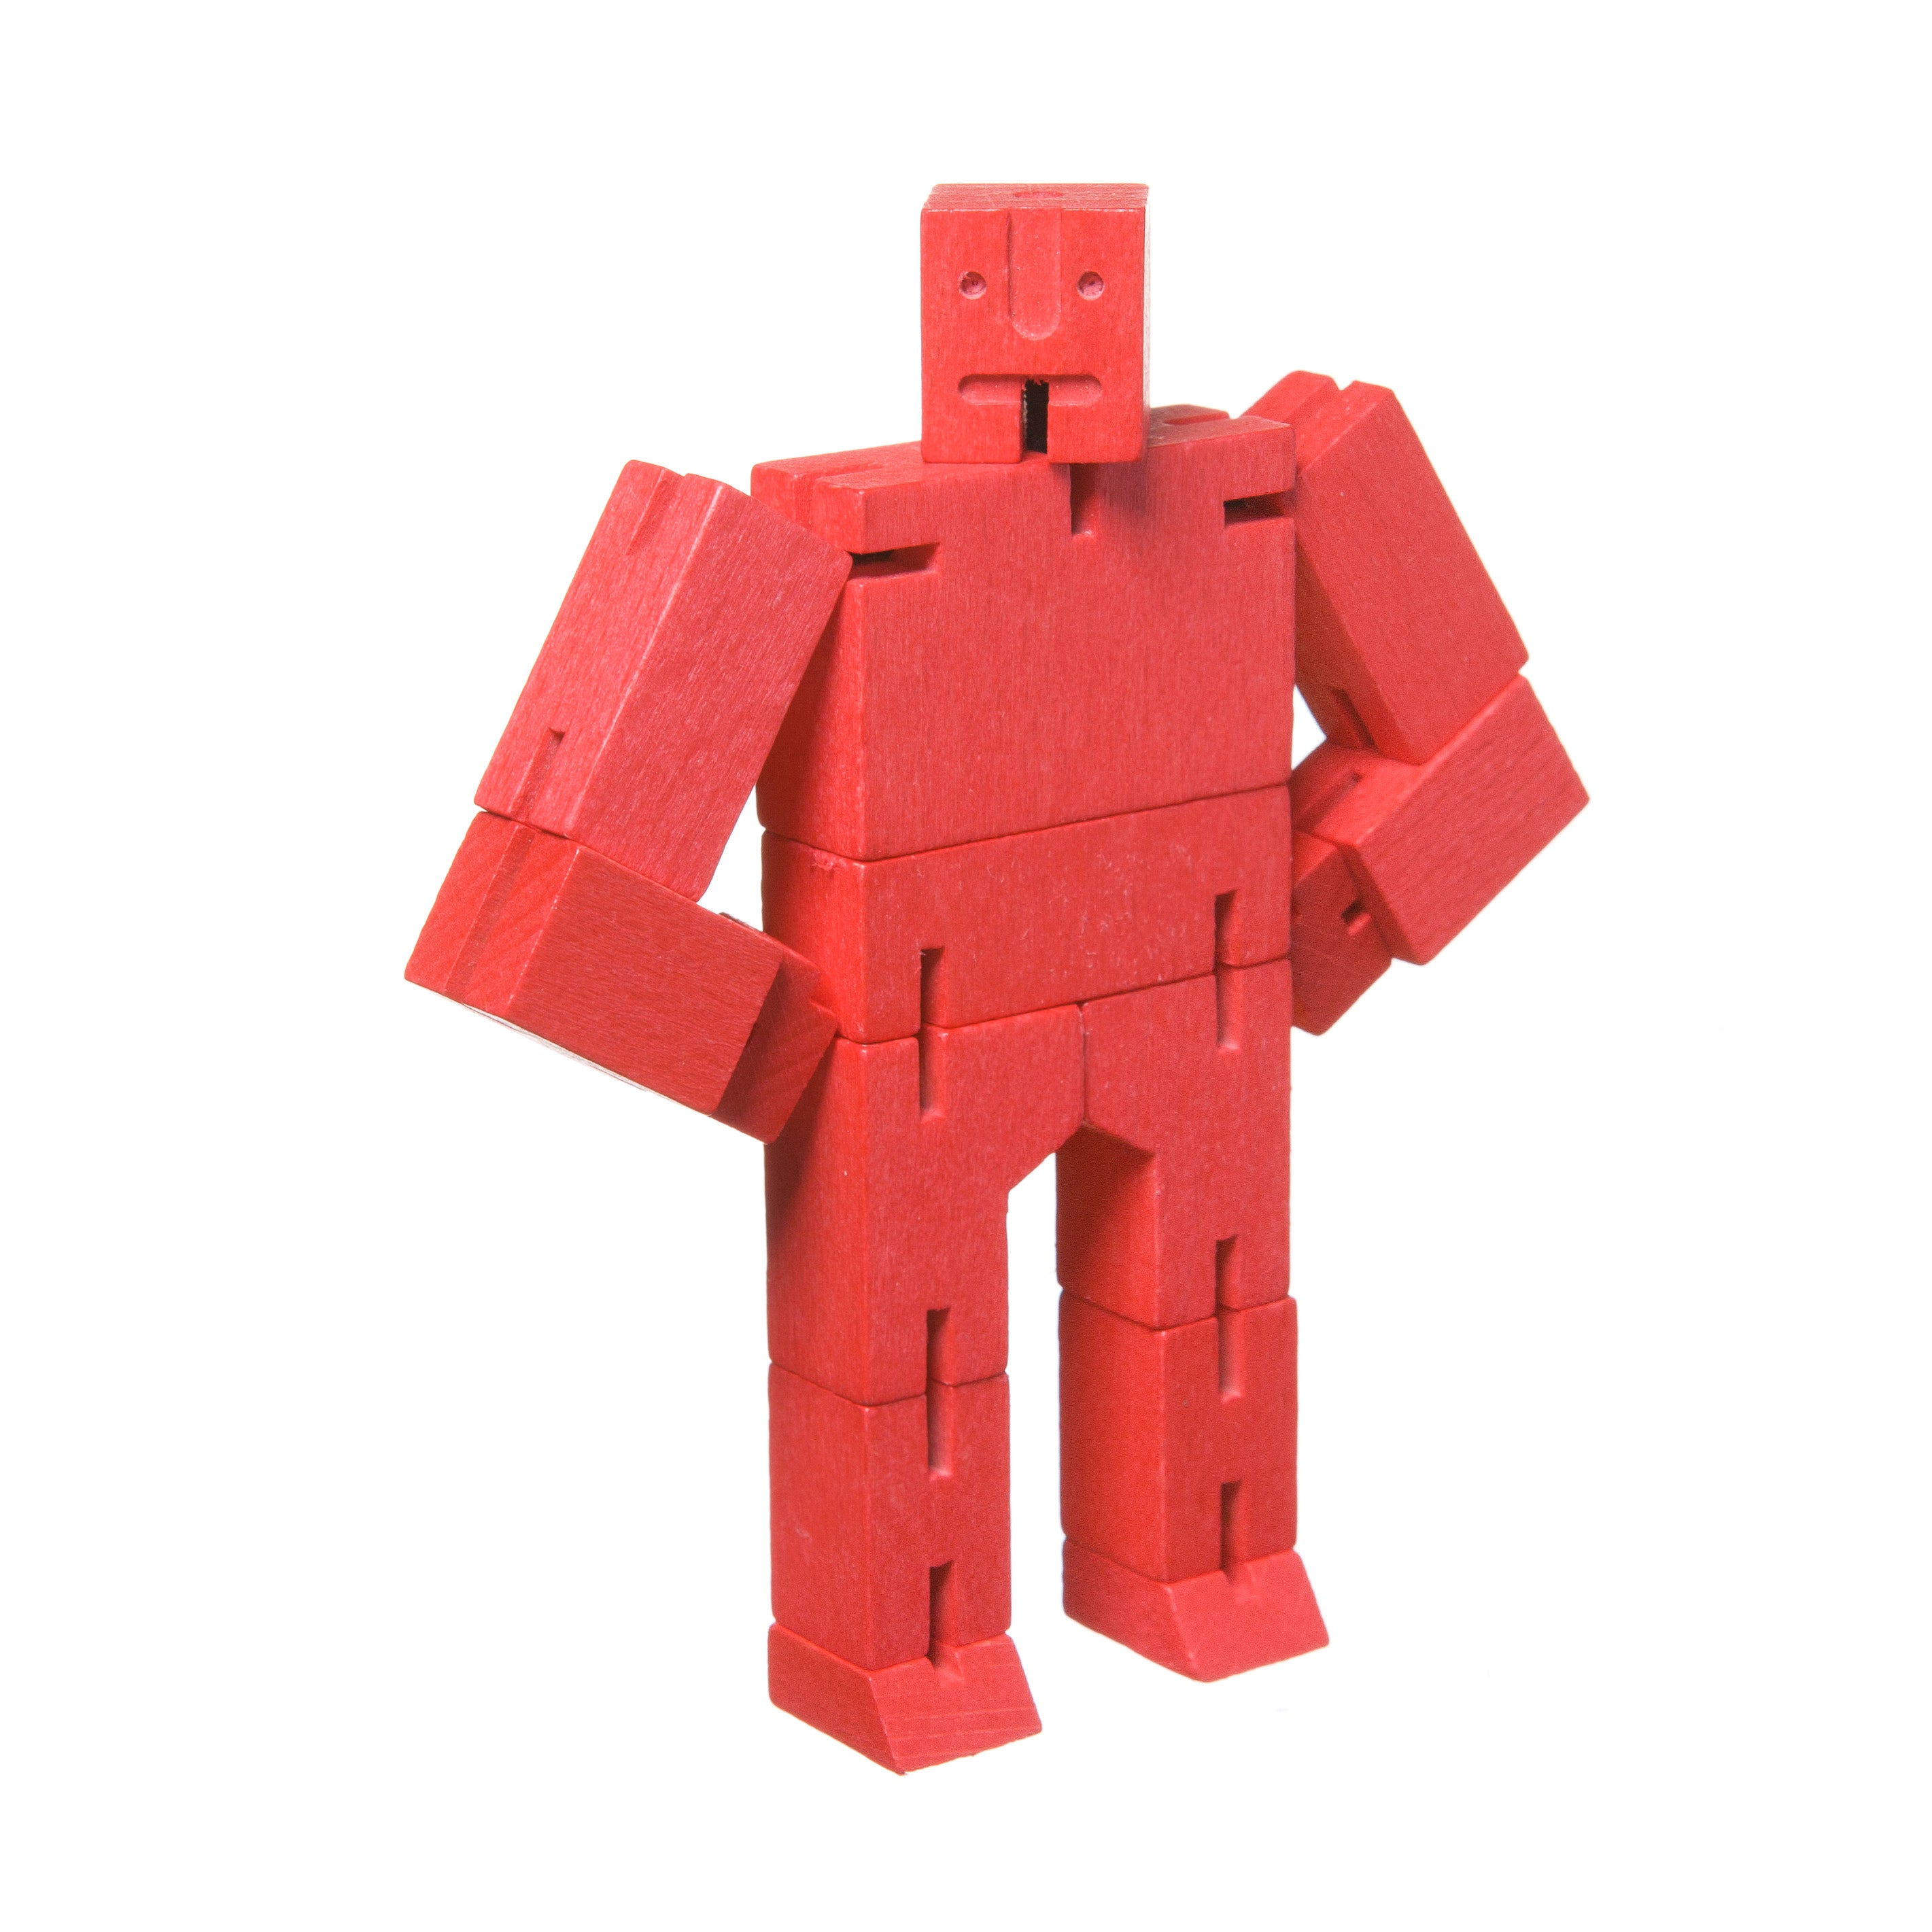 Cubebot | Red - Small - Moo Like a Monkey